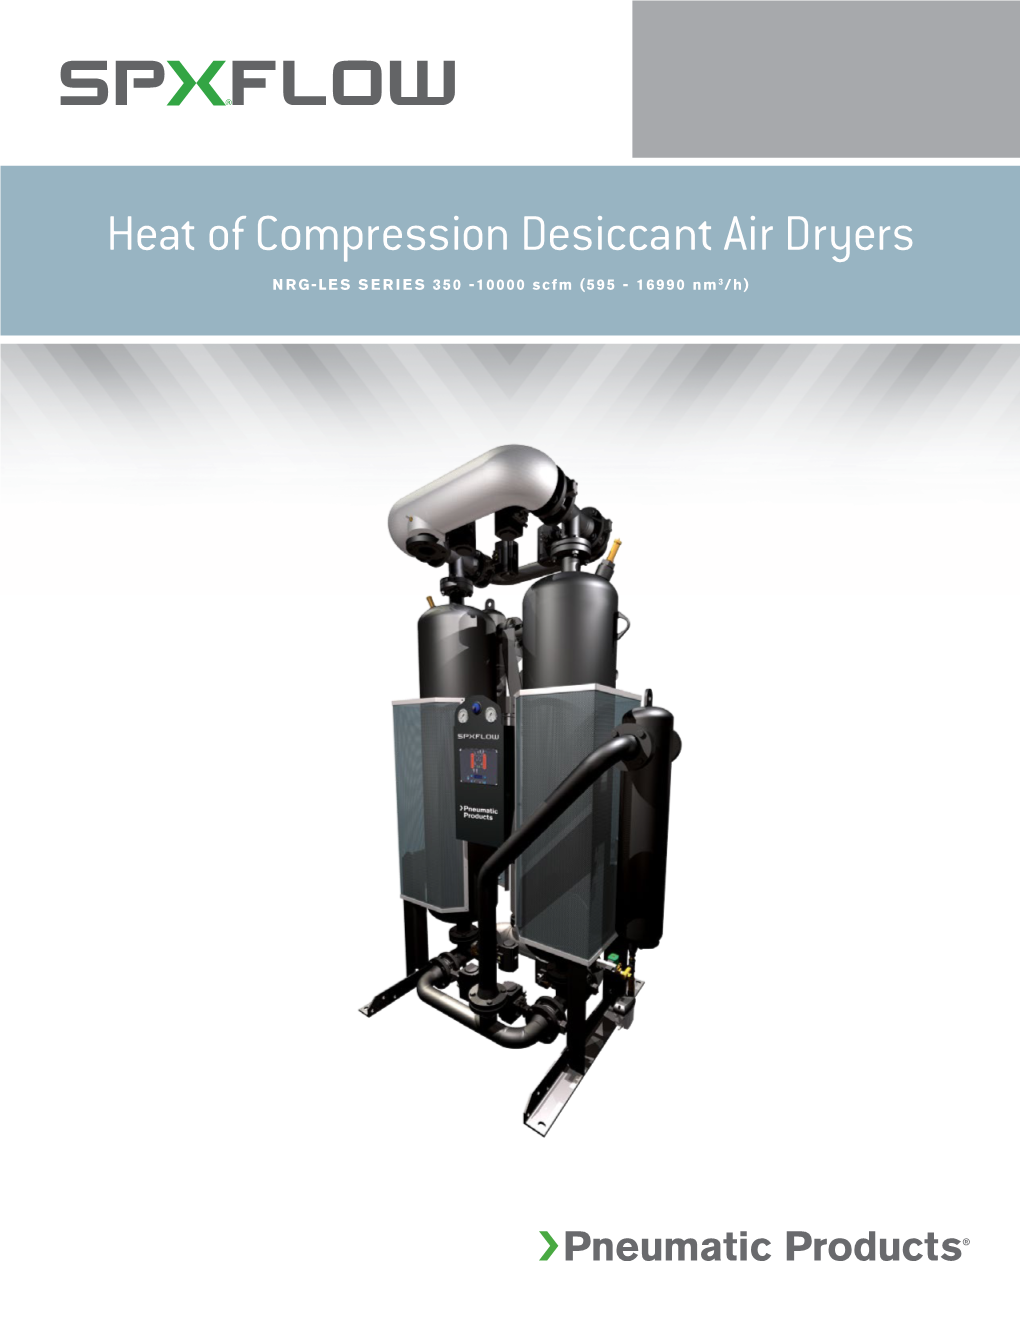 Heat of Compression Desiccant Air Dryers